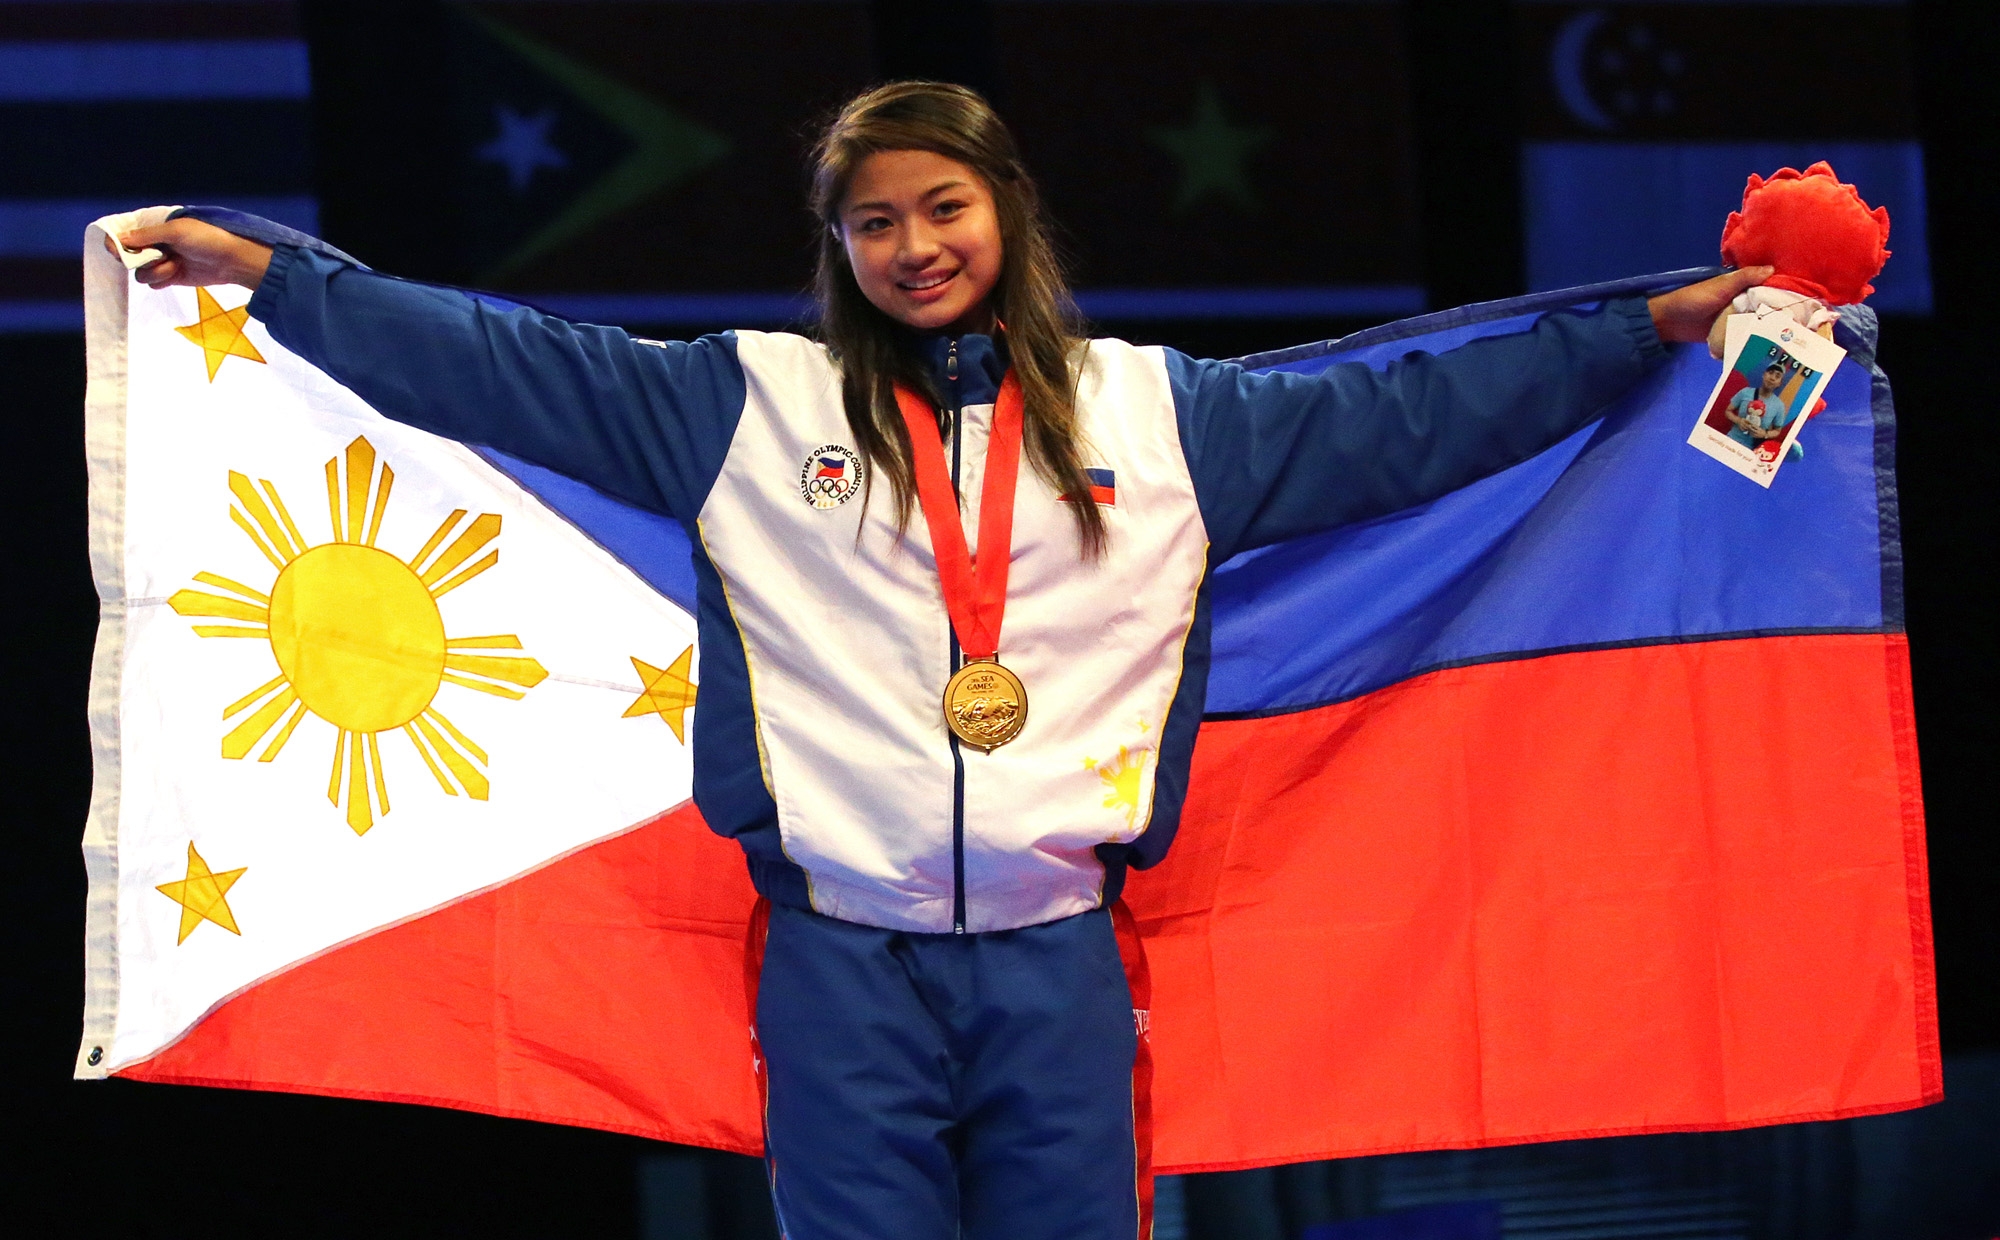 Gold medalist Pauline Lopez of the Philippines during the 28th SEA Games womens under 57kg final held at the Singapore Expo Hall 2  after defeating Thi Thu Hien Pham of Vietnam. INQUIRER PHOTO/RAFFY LERMA